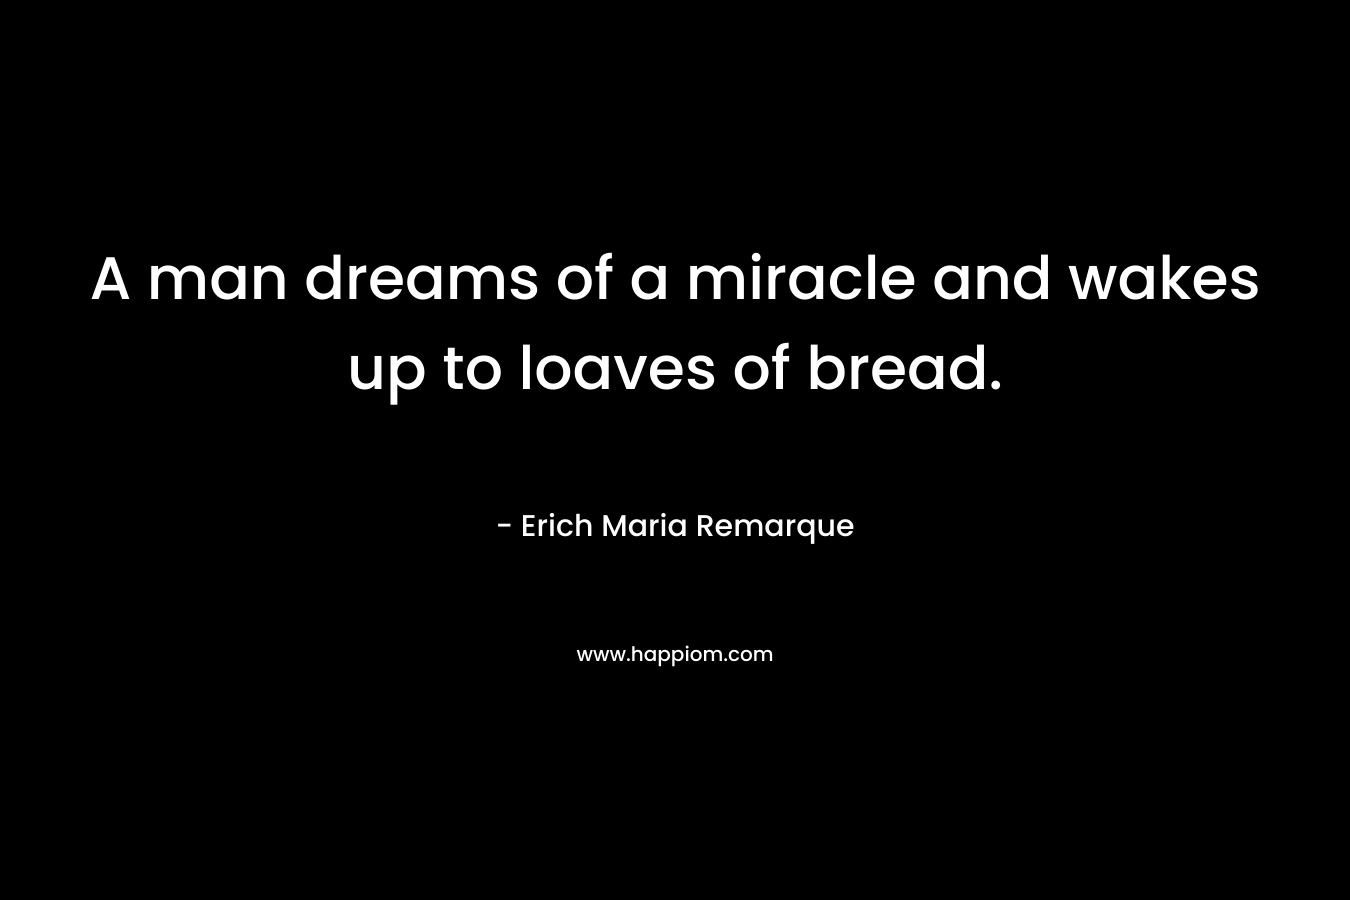 A man dreams of a miracle and wakes up to loaves of bread.